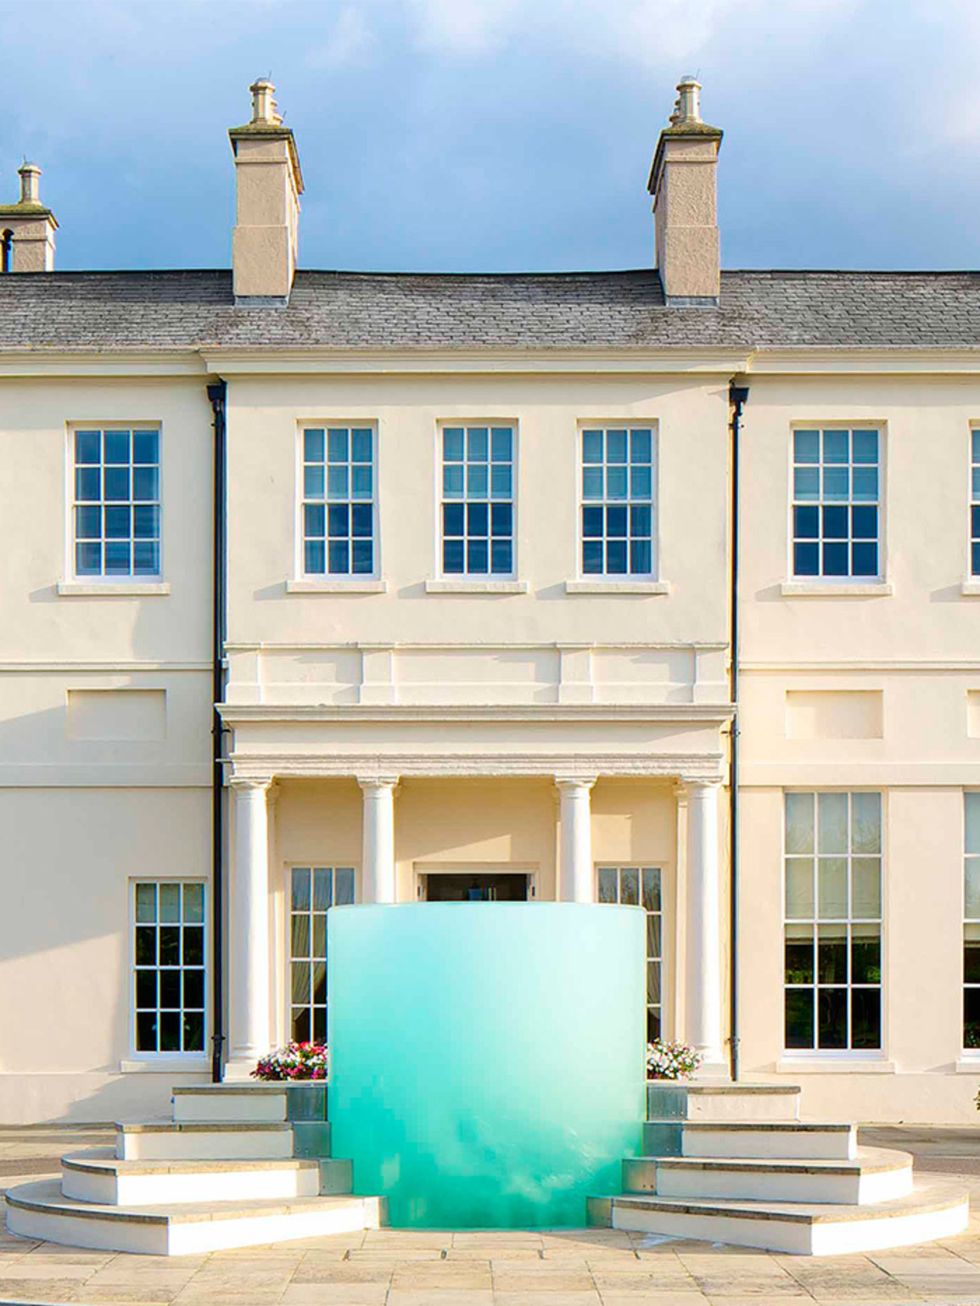 <p>So that&rsquo;s why I treated her to an overnight stay at Seaham Hall, once home to playboy poet Lord Byron, now a stunning Hotel and Spa settled on the cliffs of County Durham. The weather was typically moody outside, but inside we cosied up in our su